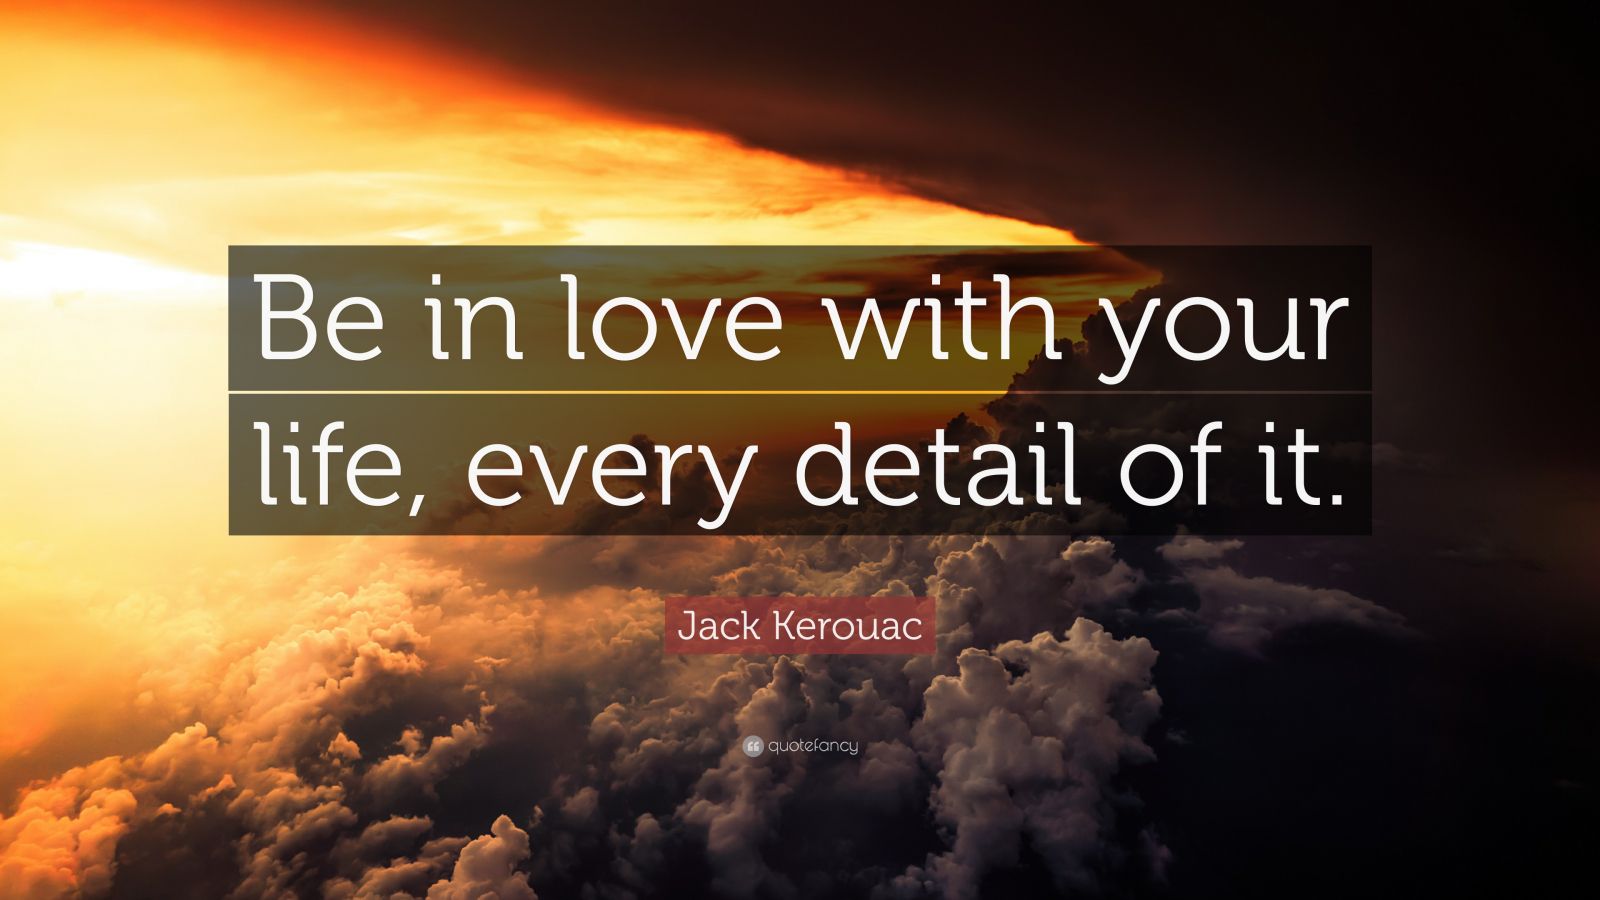 Jack Kerouac Quote: “Be in love with your life, every detail of it ...